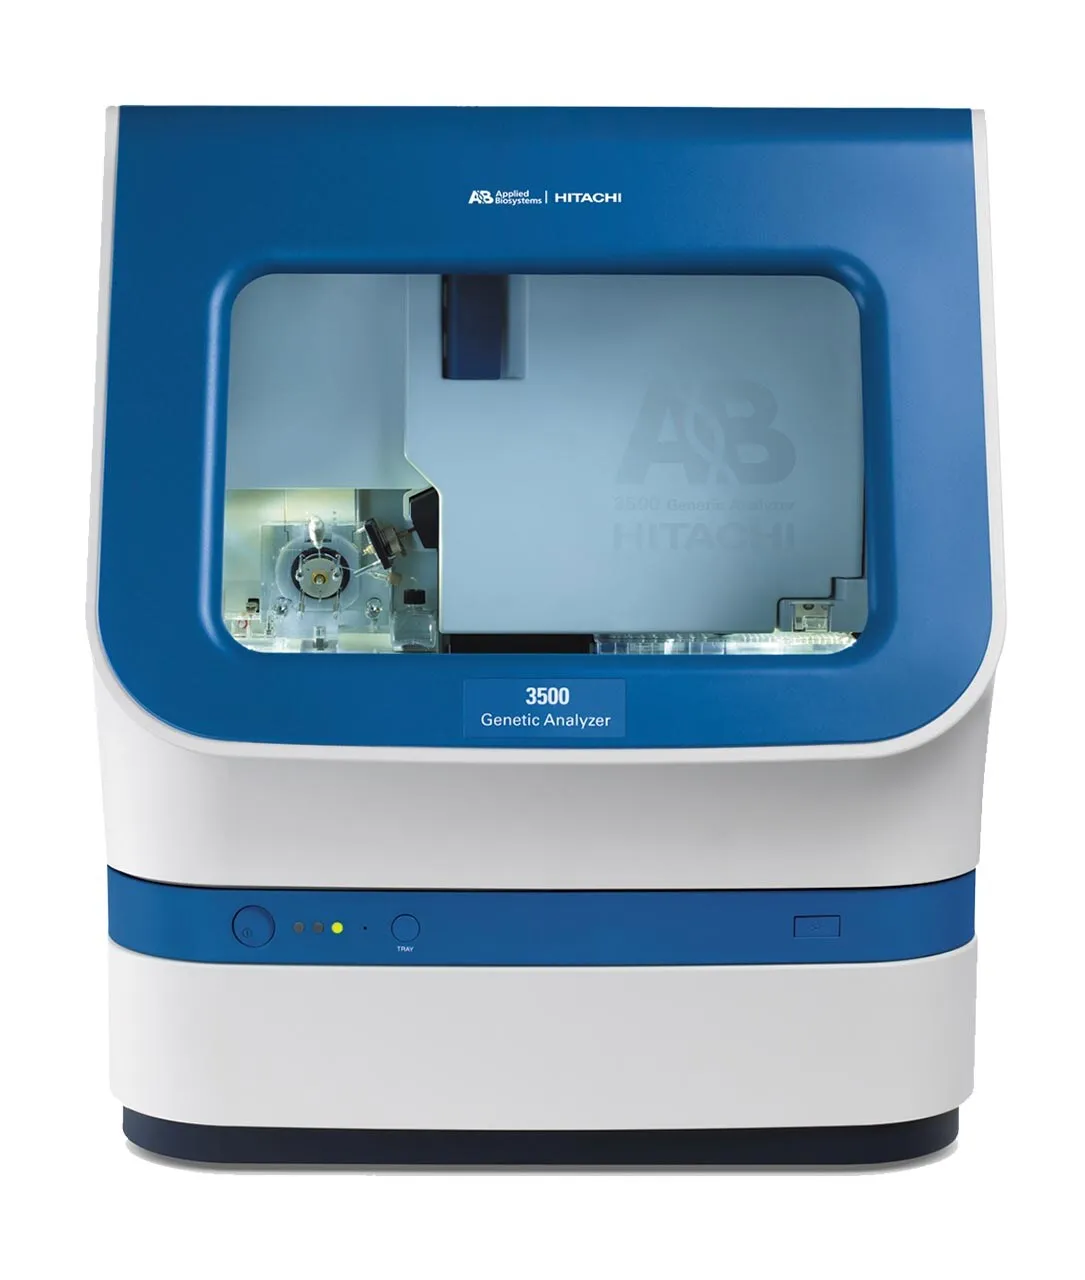 Thermo Fisher ABI 3500 Genetic Analyzer for sale in excellent condition